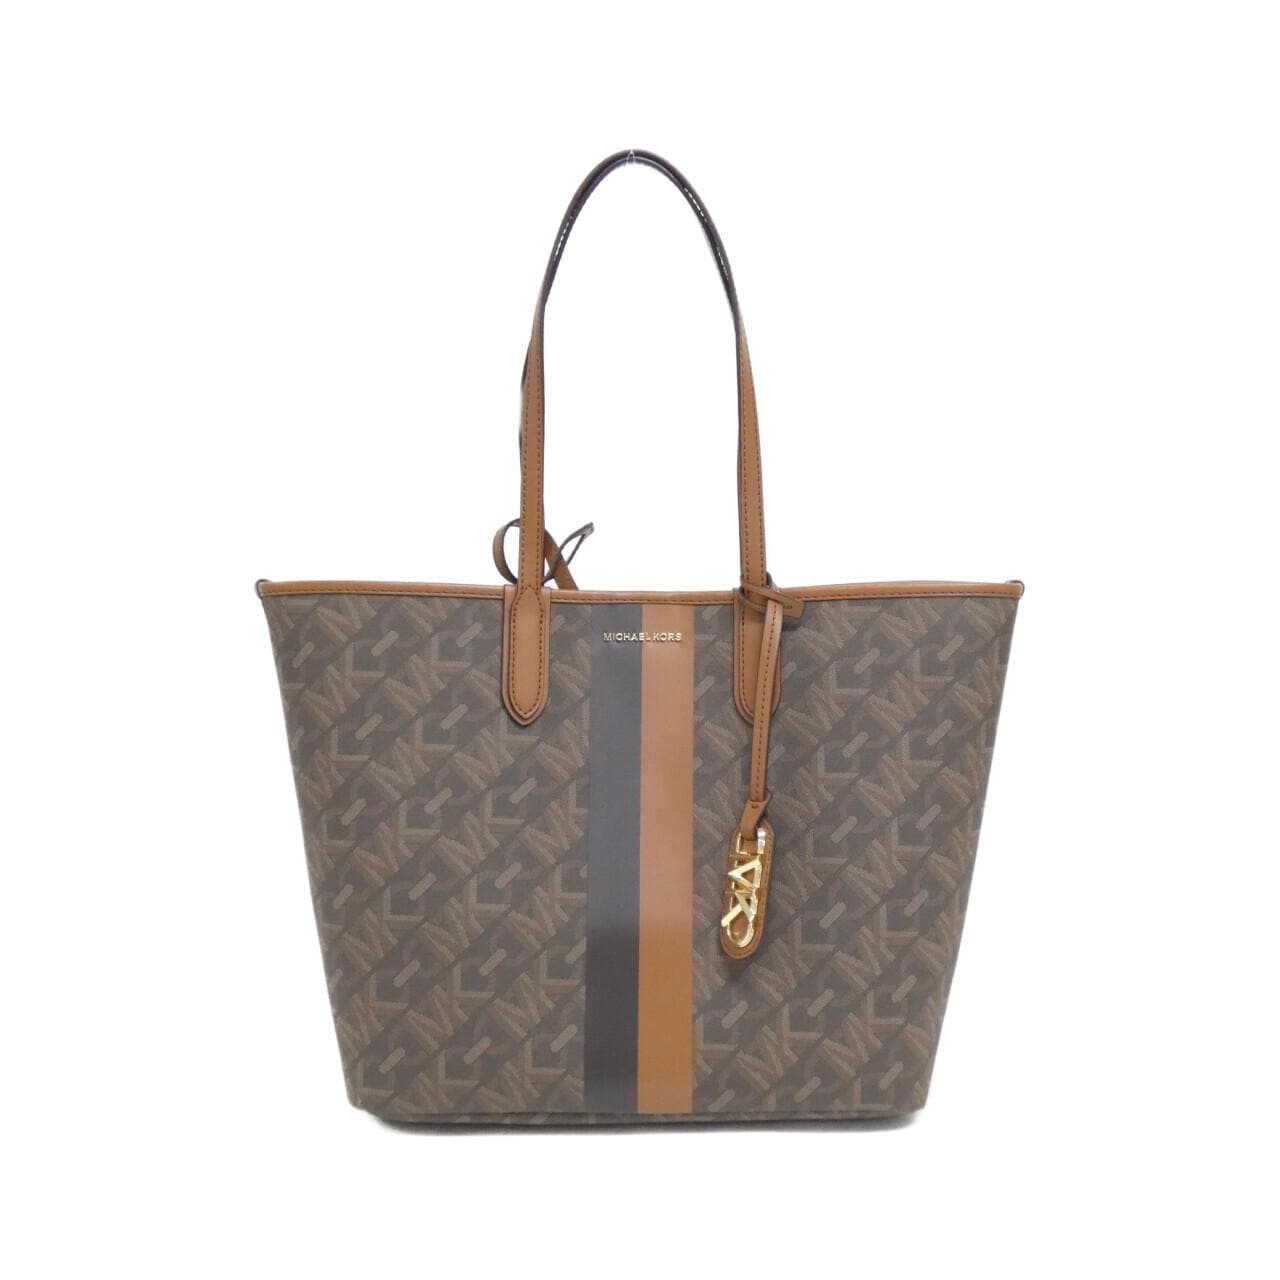 Brand New Michael Kors Bag, Luxury, Bags & Wallets on Carousell